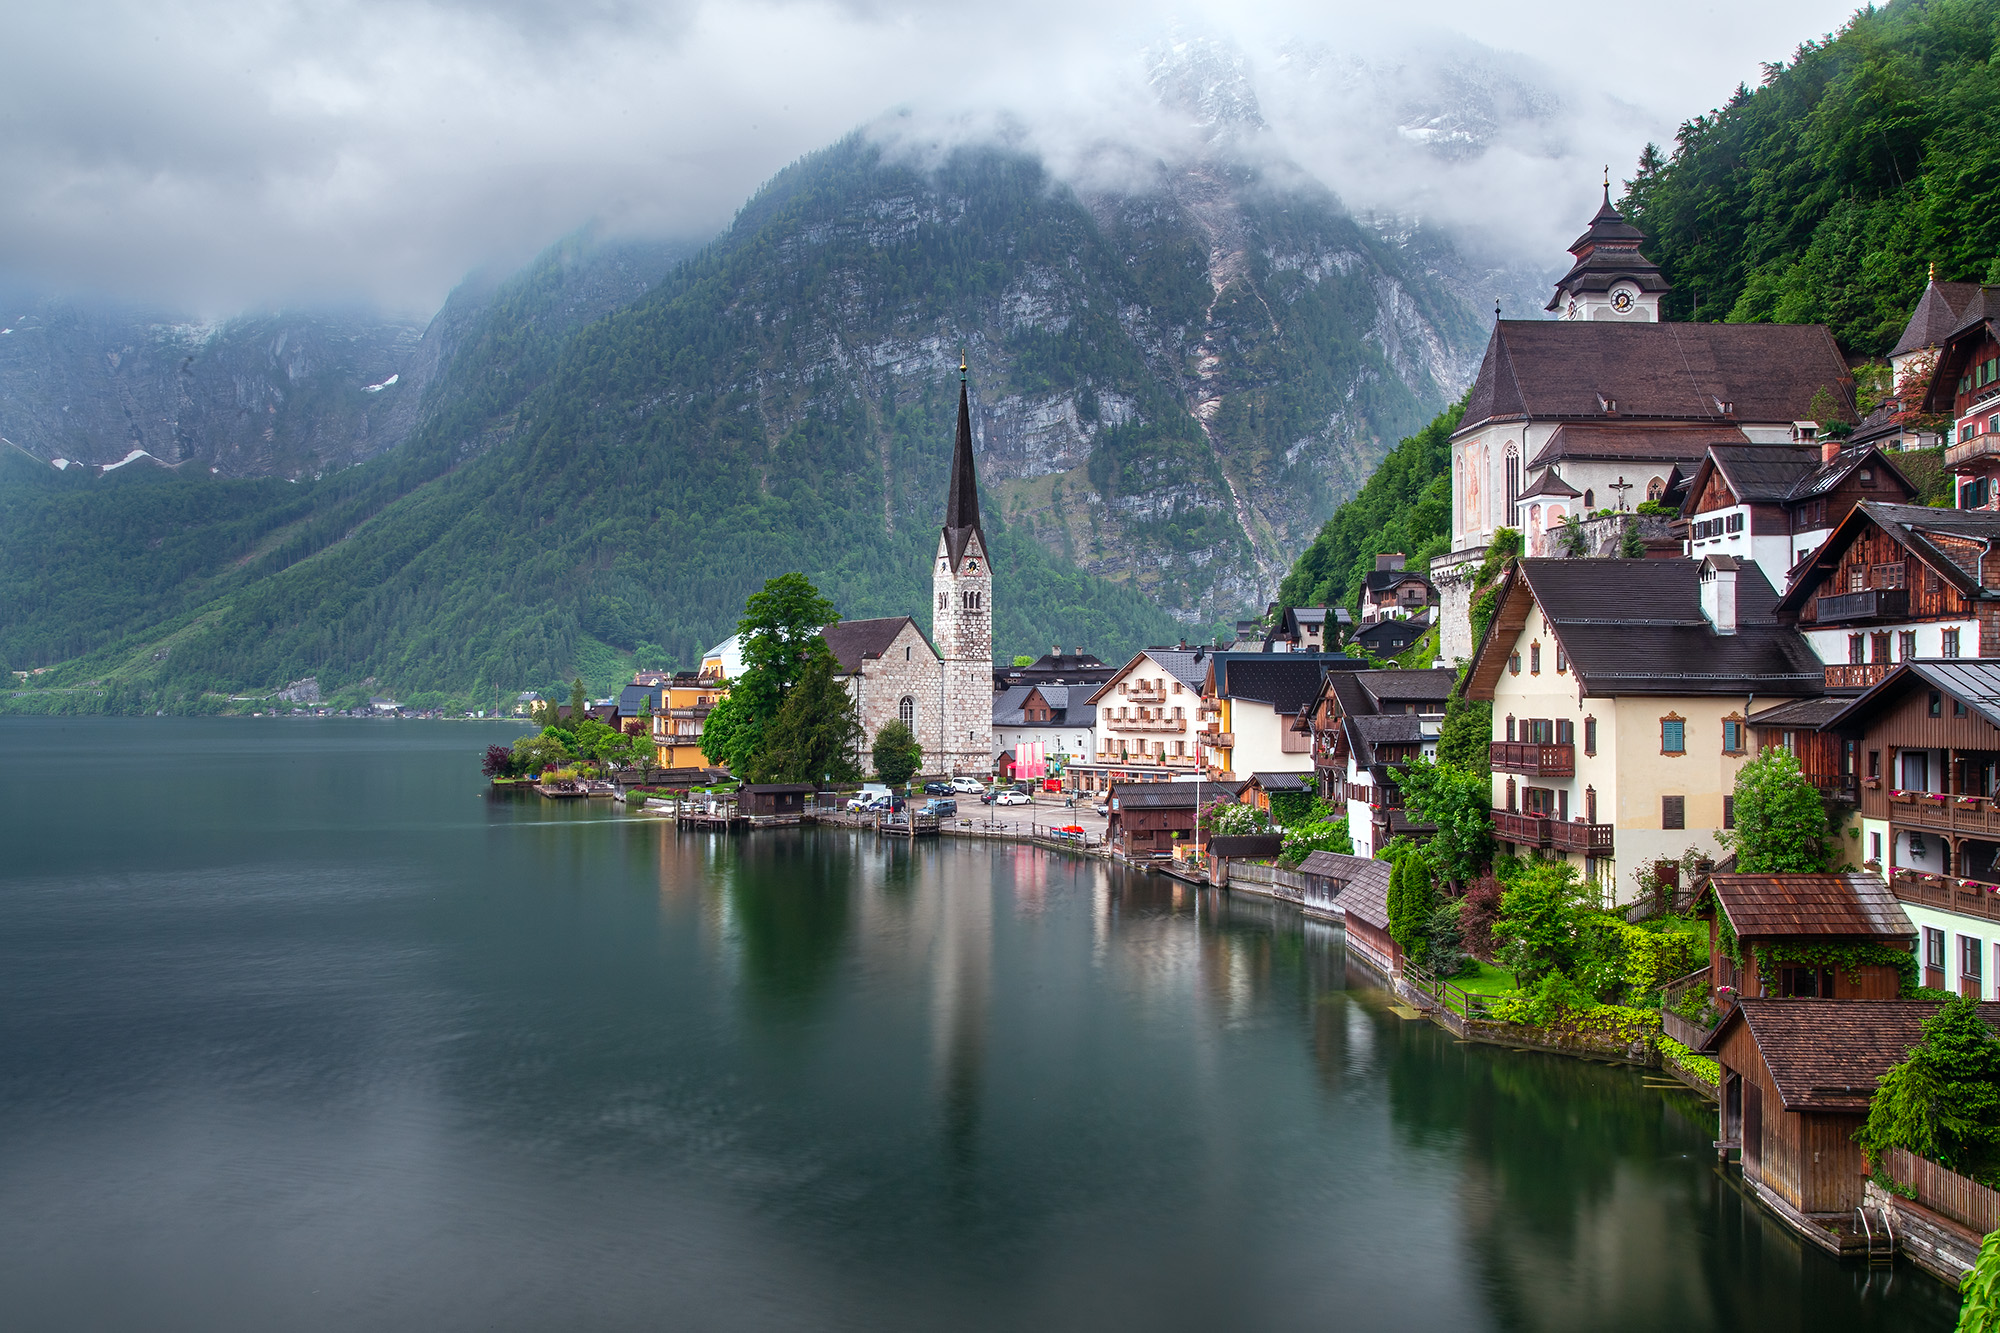 On a drizzly day in the picturesque village of Hallstatt, Austria, this image captures the essence of its enduring charm. The...